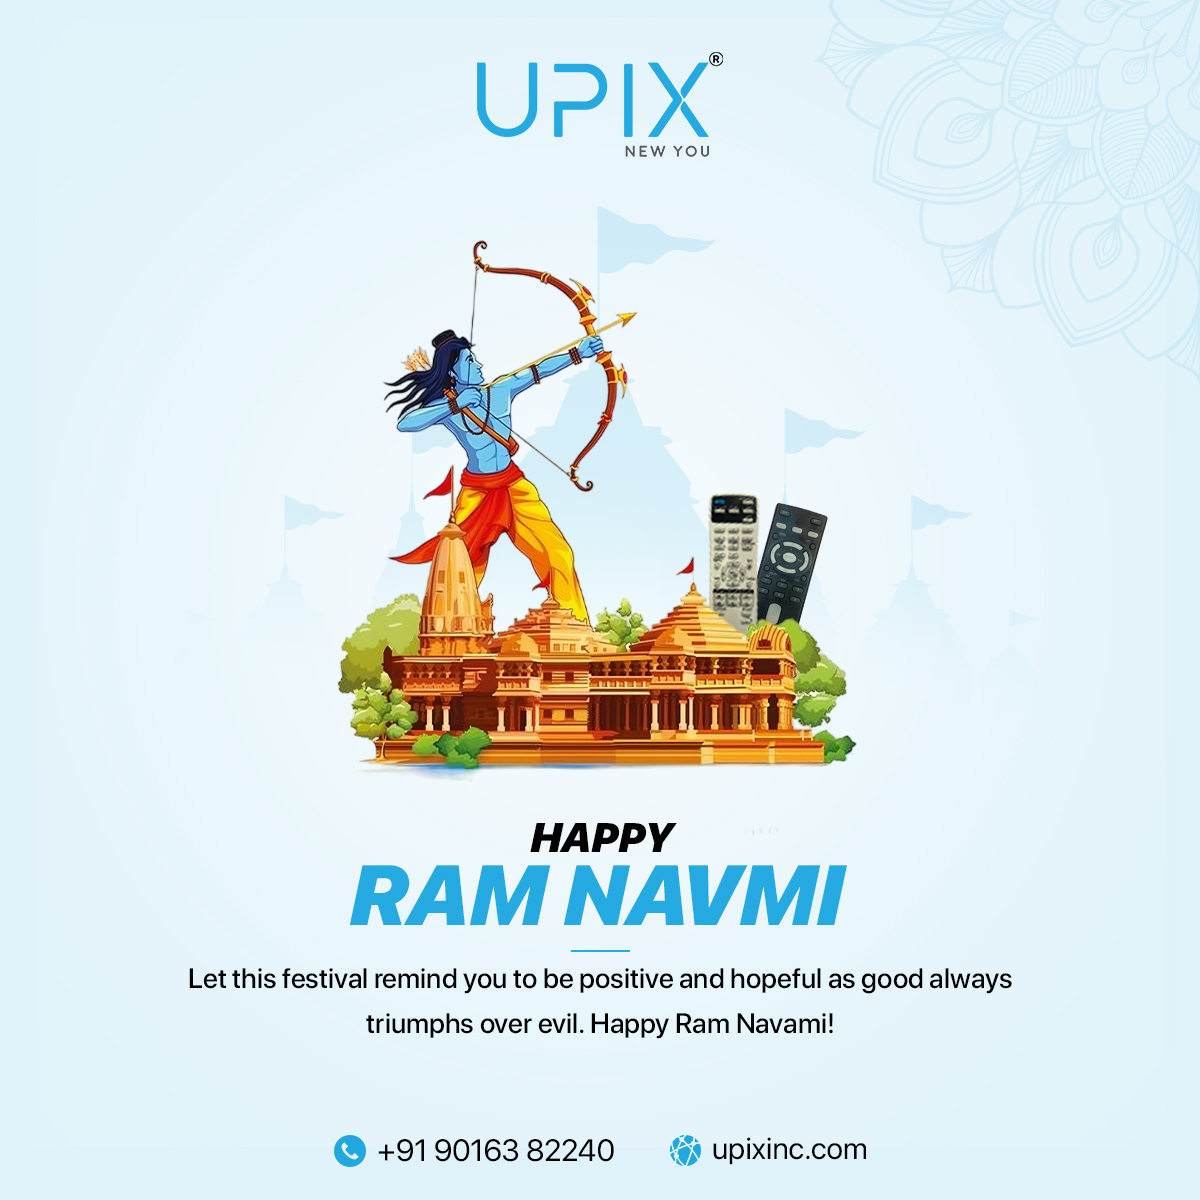 Let this festival remind you to be positive and hopeful as good always triumphs over evil. Happy Ram Navami
.
To know more, visit- upixinc.com or WhatsApp Now wa.me/919016382240
.
#upixinc #ramnavami #UpixTech #ReliablePower #EfficientCharging #tvremote #acremote